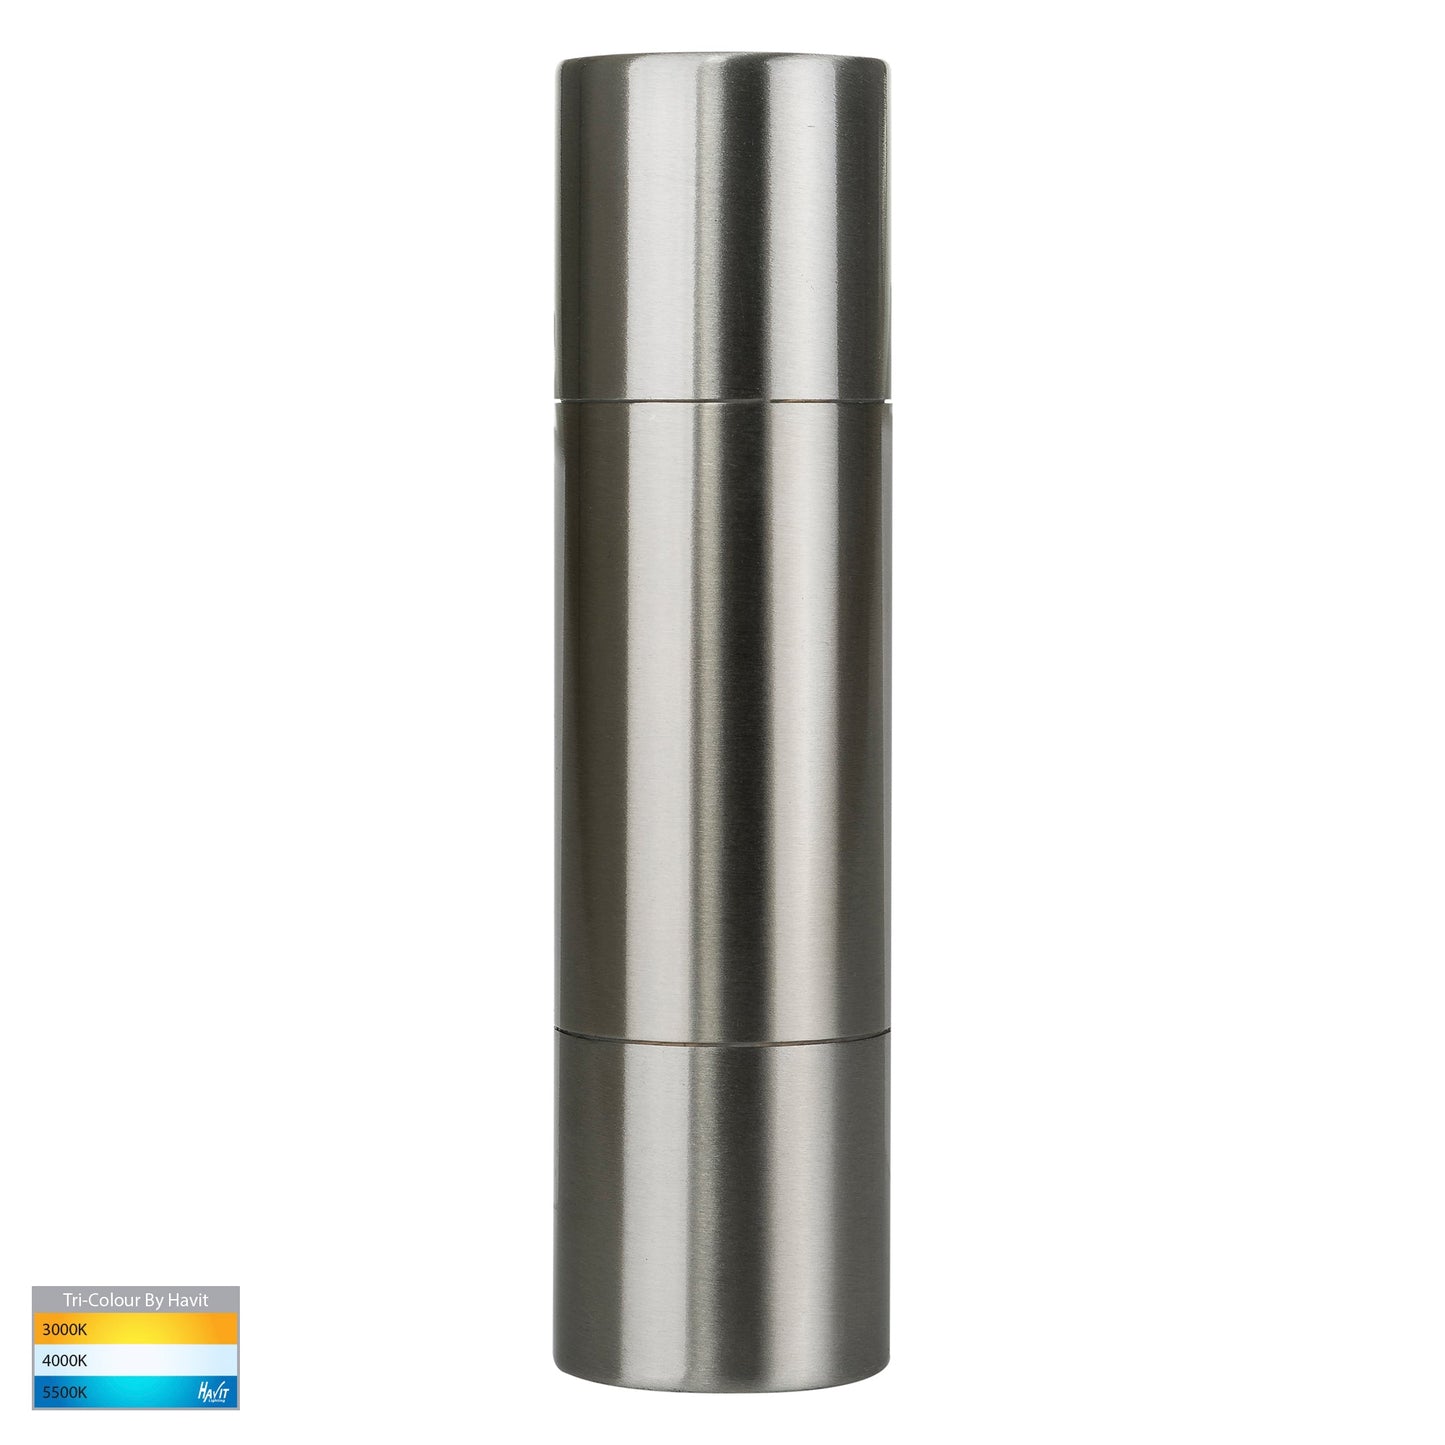 Hv1071t - Piaz Stainless Steel Tri Colour Up & Down Wall Pillar Lights